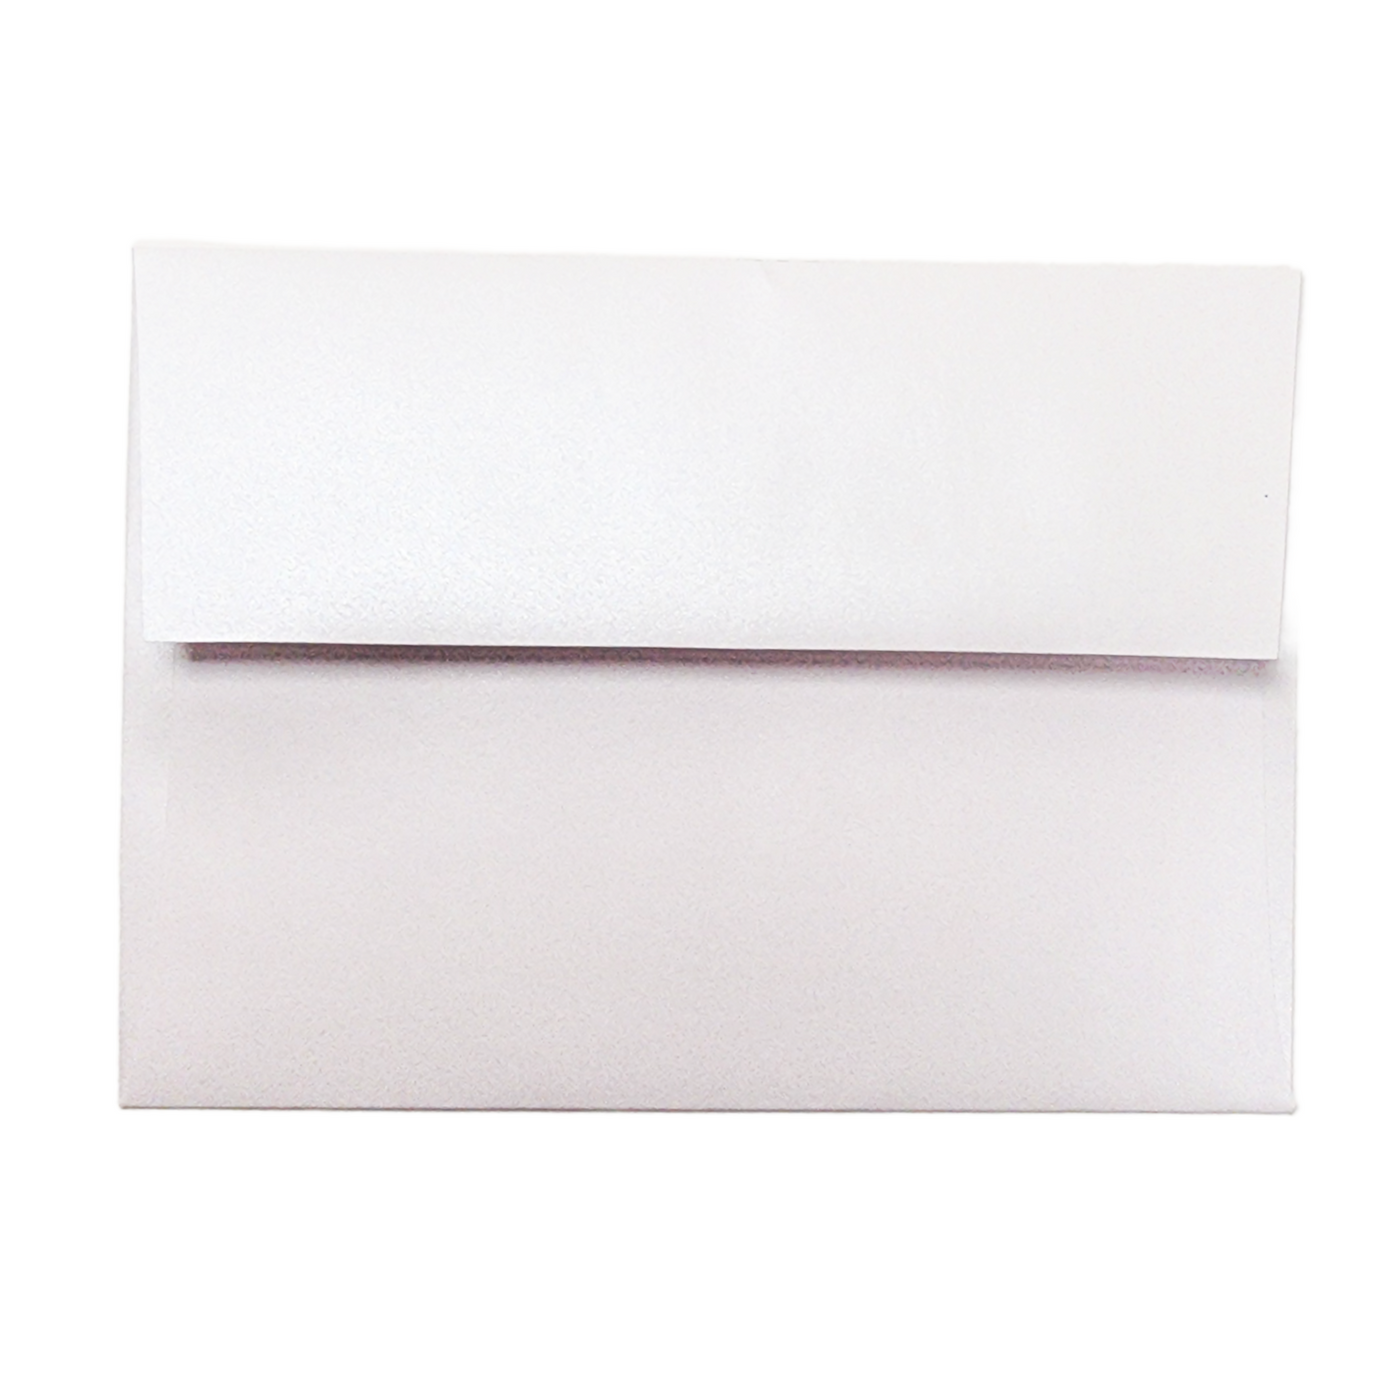 Bright white metallic envelope with pearlescent finish that instantly elevates your handmade invitations. Pearlescent white envelopes for wedding invitations and more.